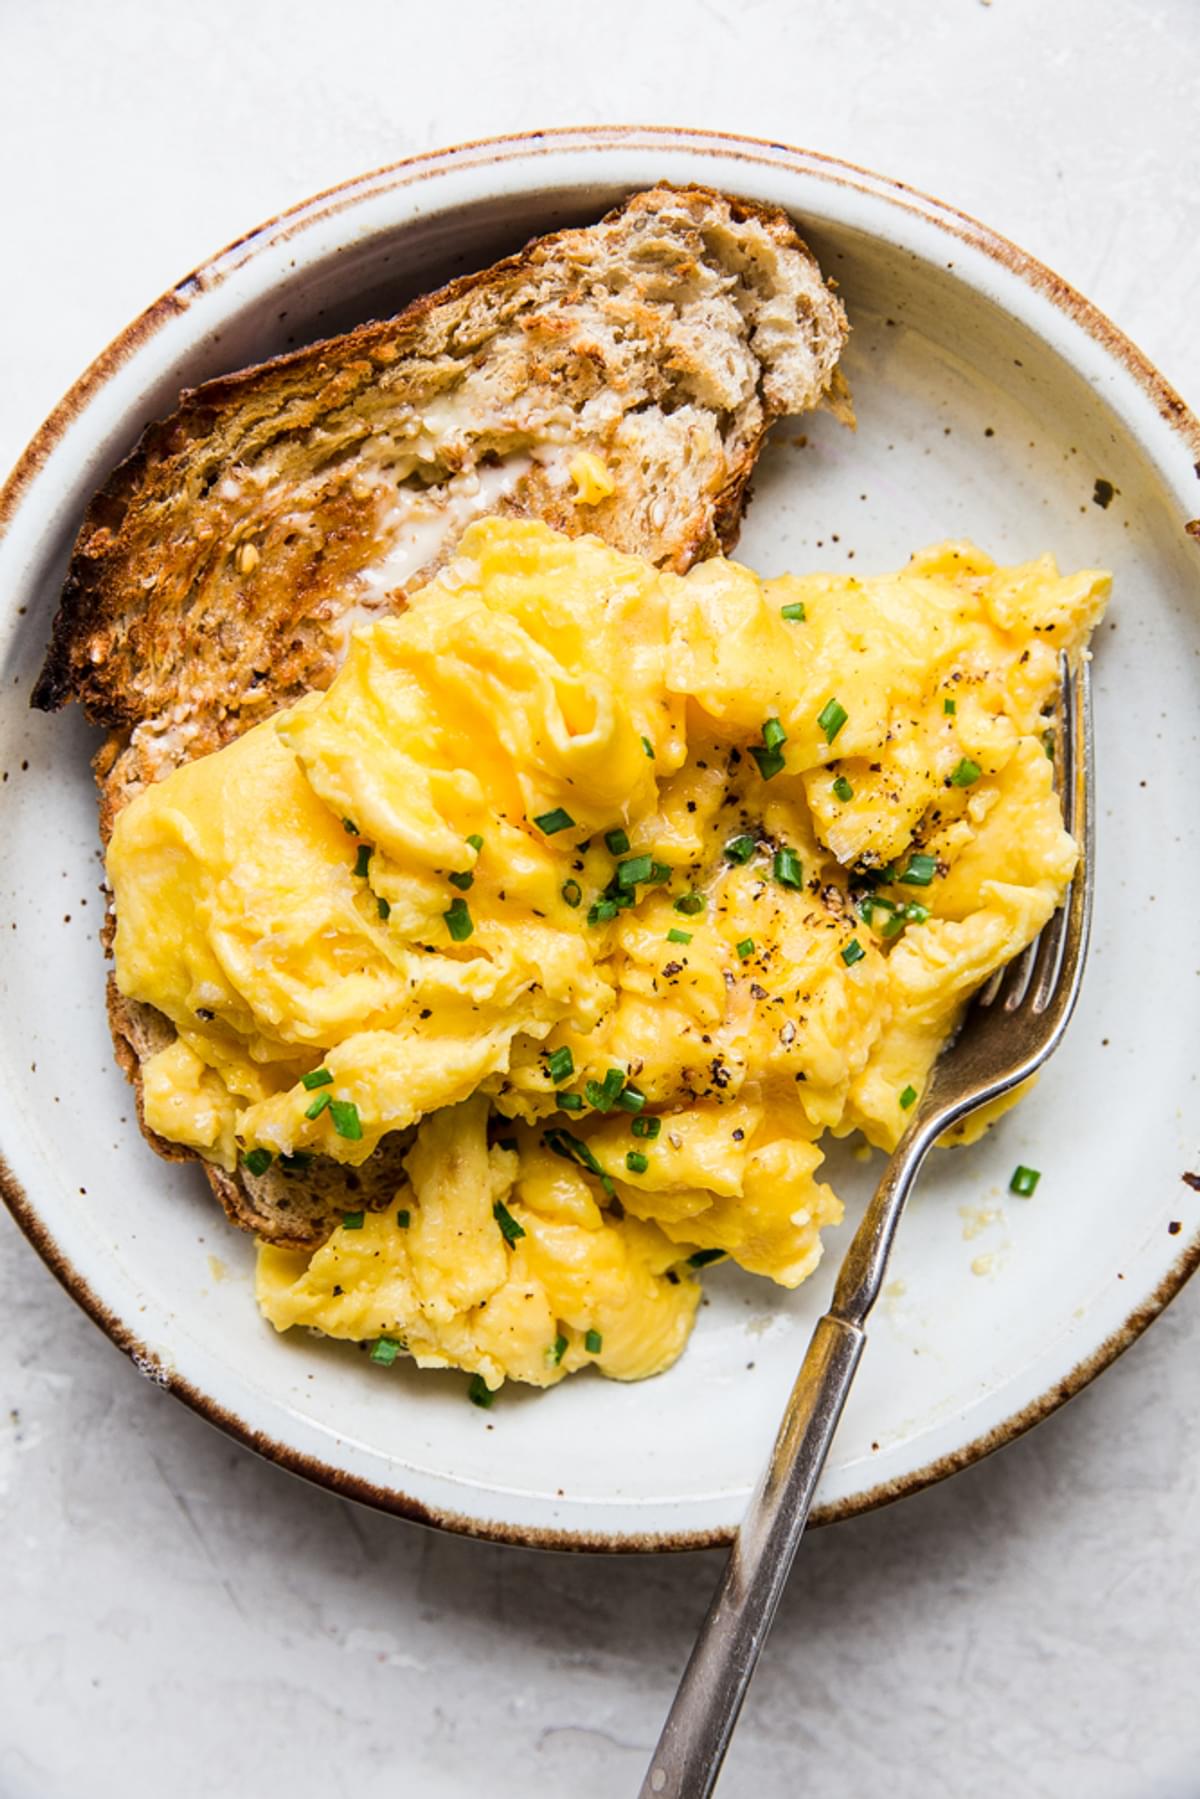 Soft Scrambled Eggs on toast with chives